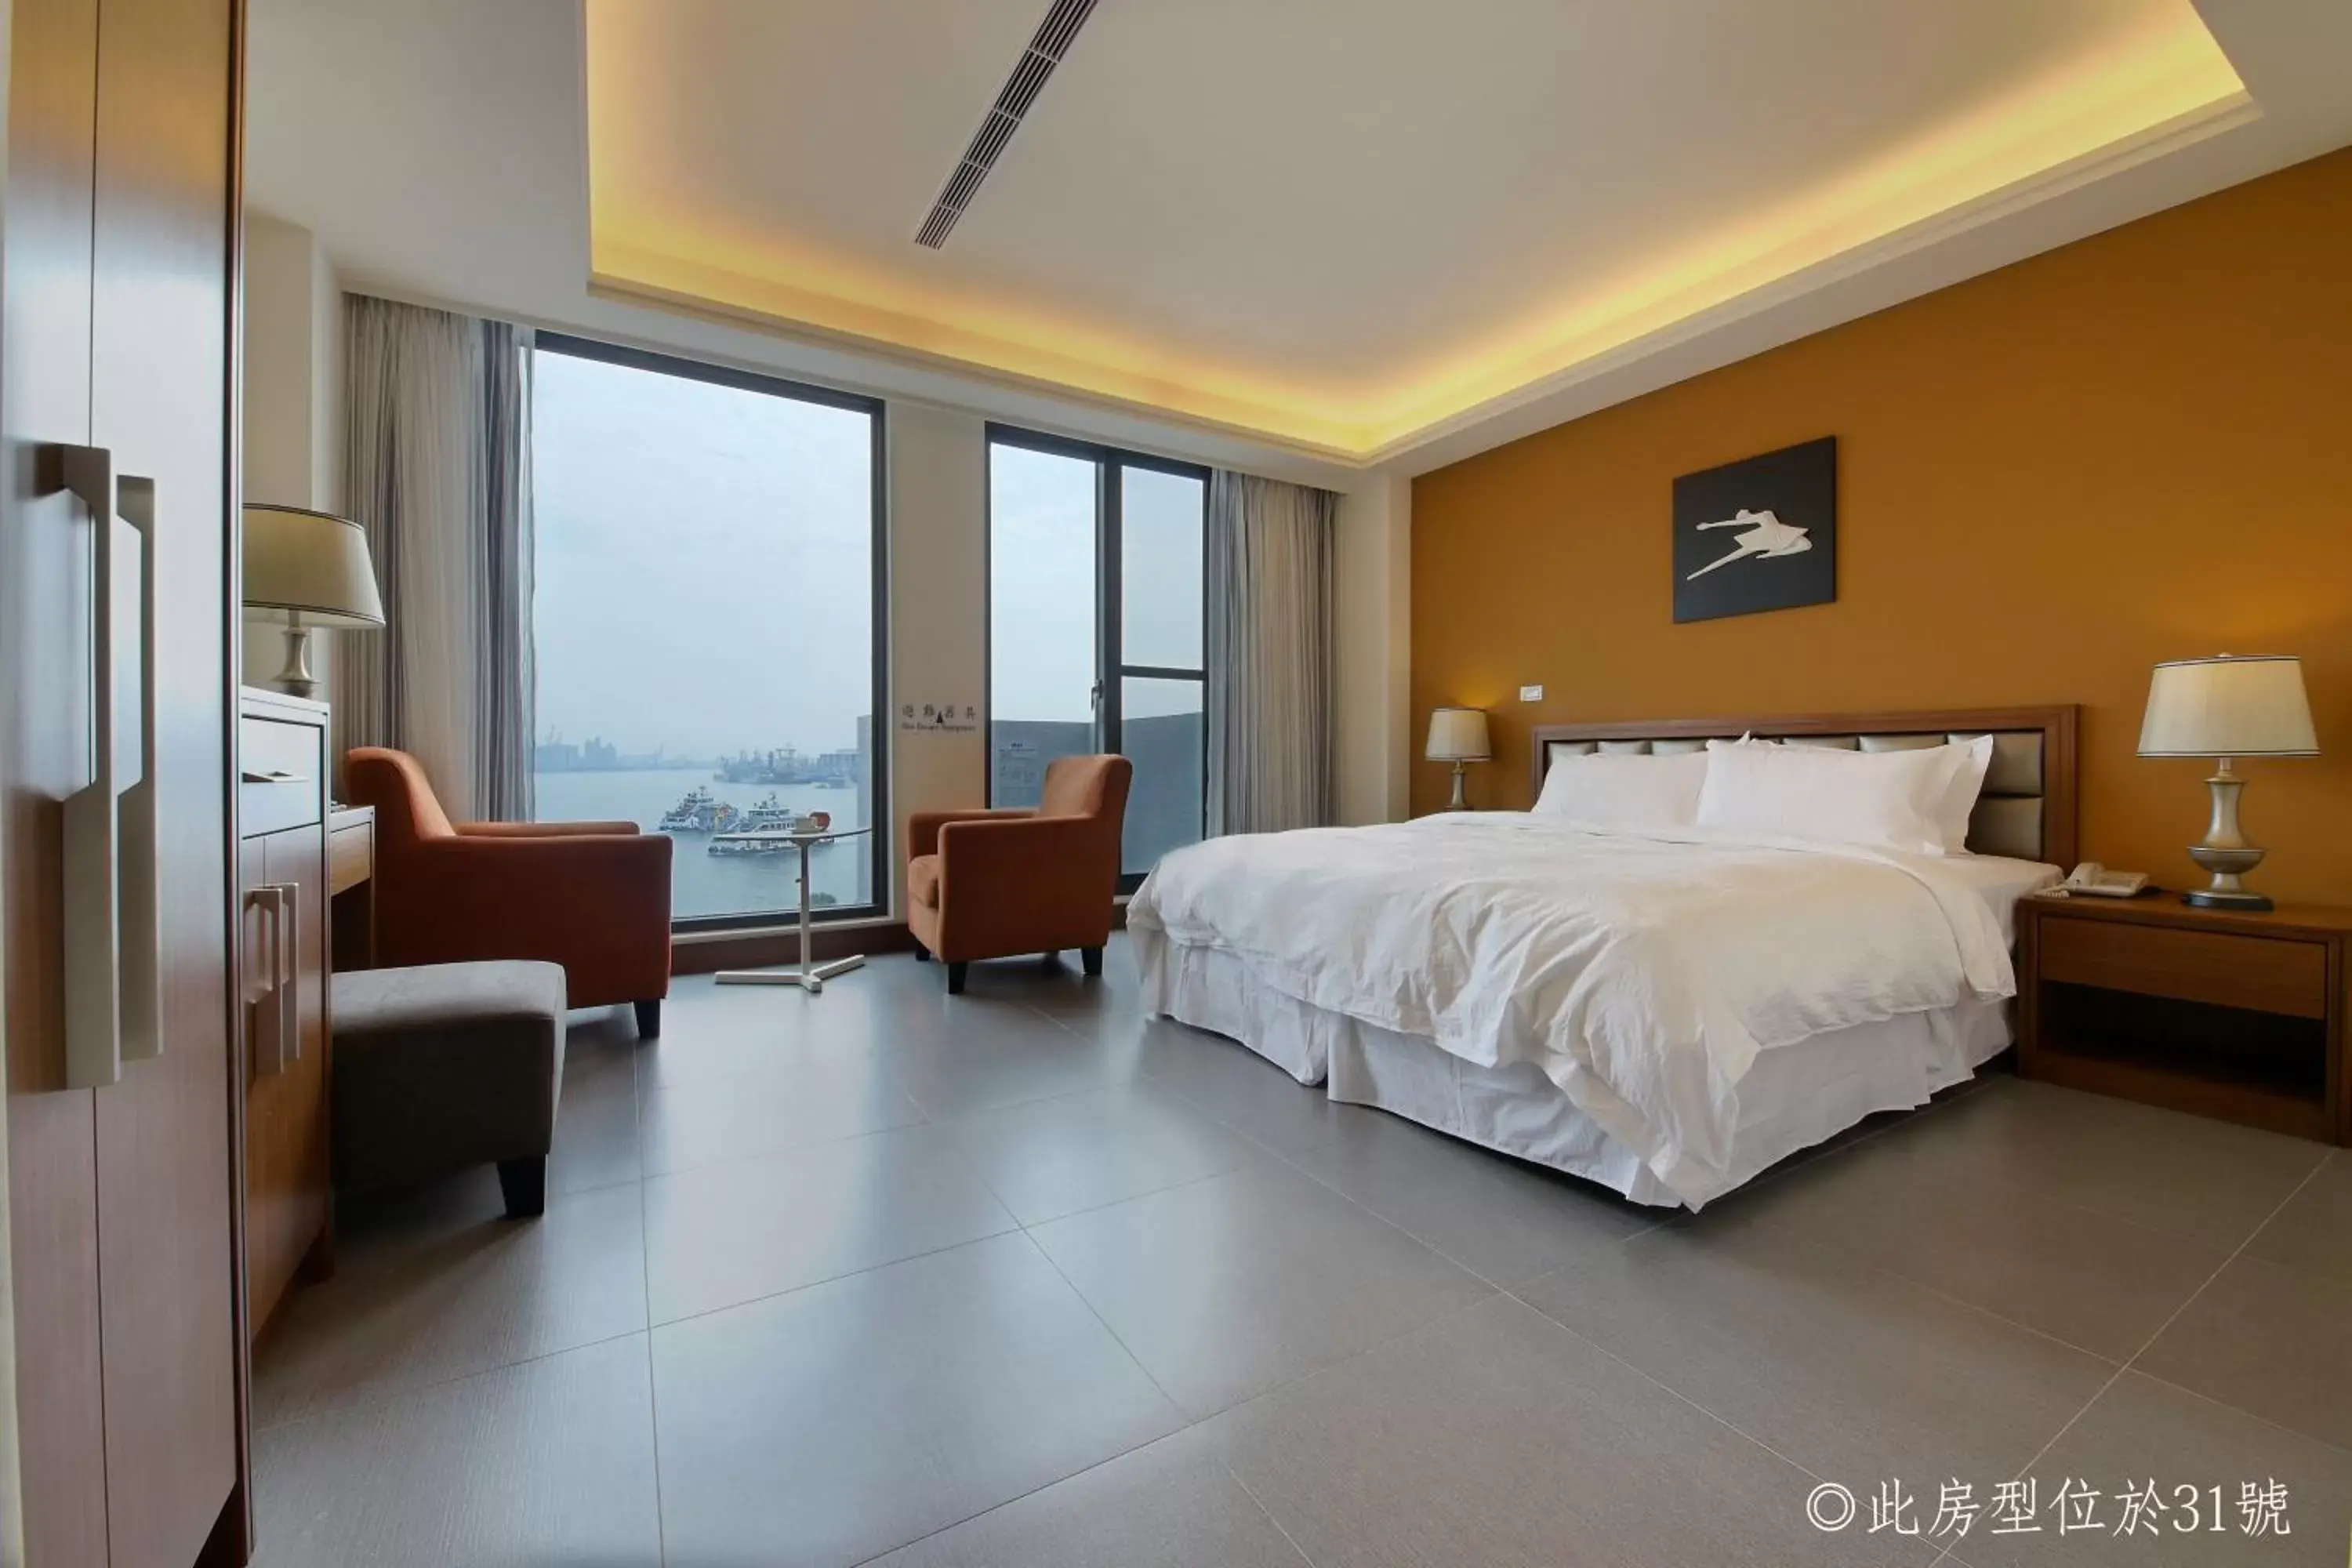 Photo of the whole room in Watermark Hotel - Sizihwan